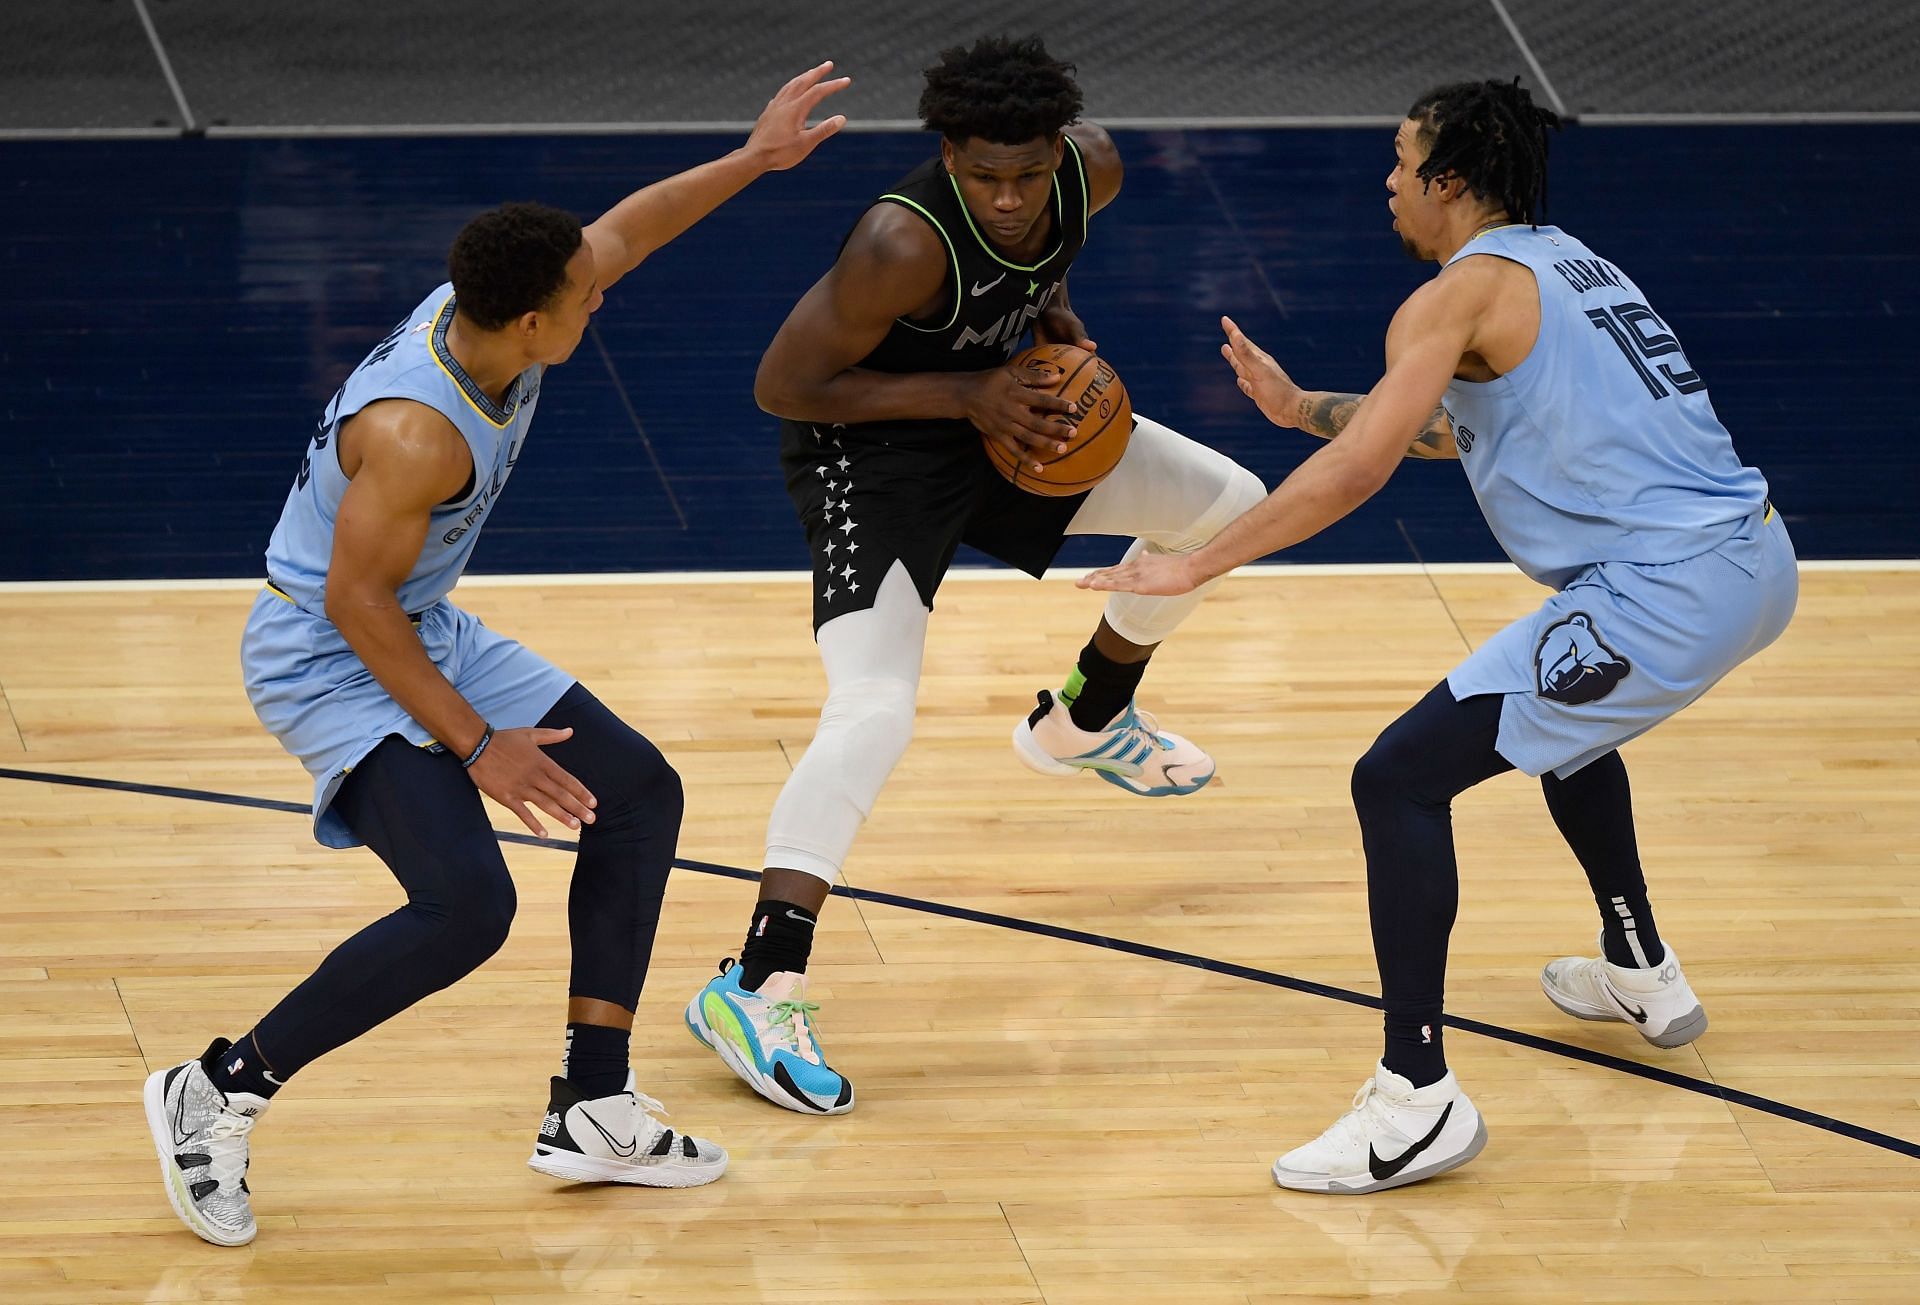 Anthony Edwards of the Timberwolves being double-teamed during a regular season match-up